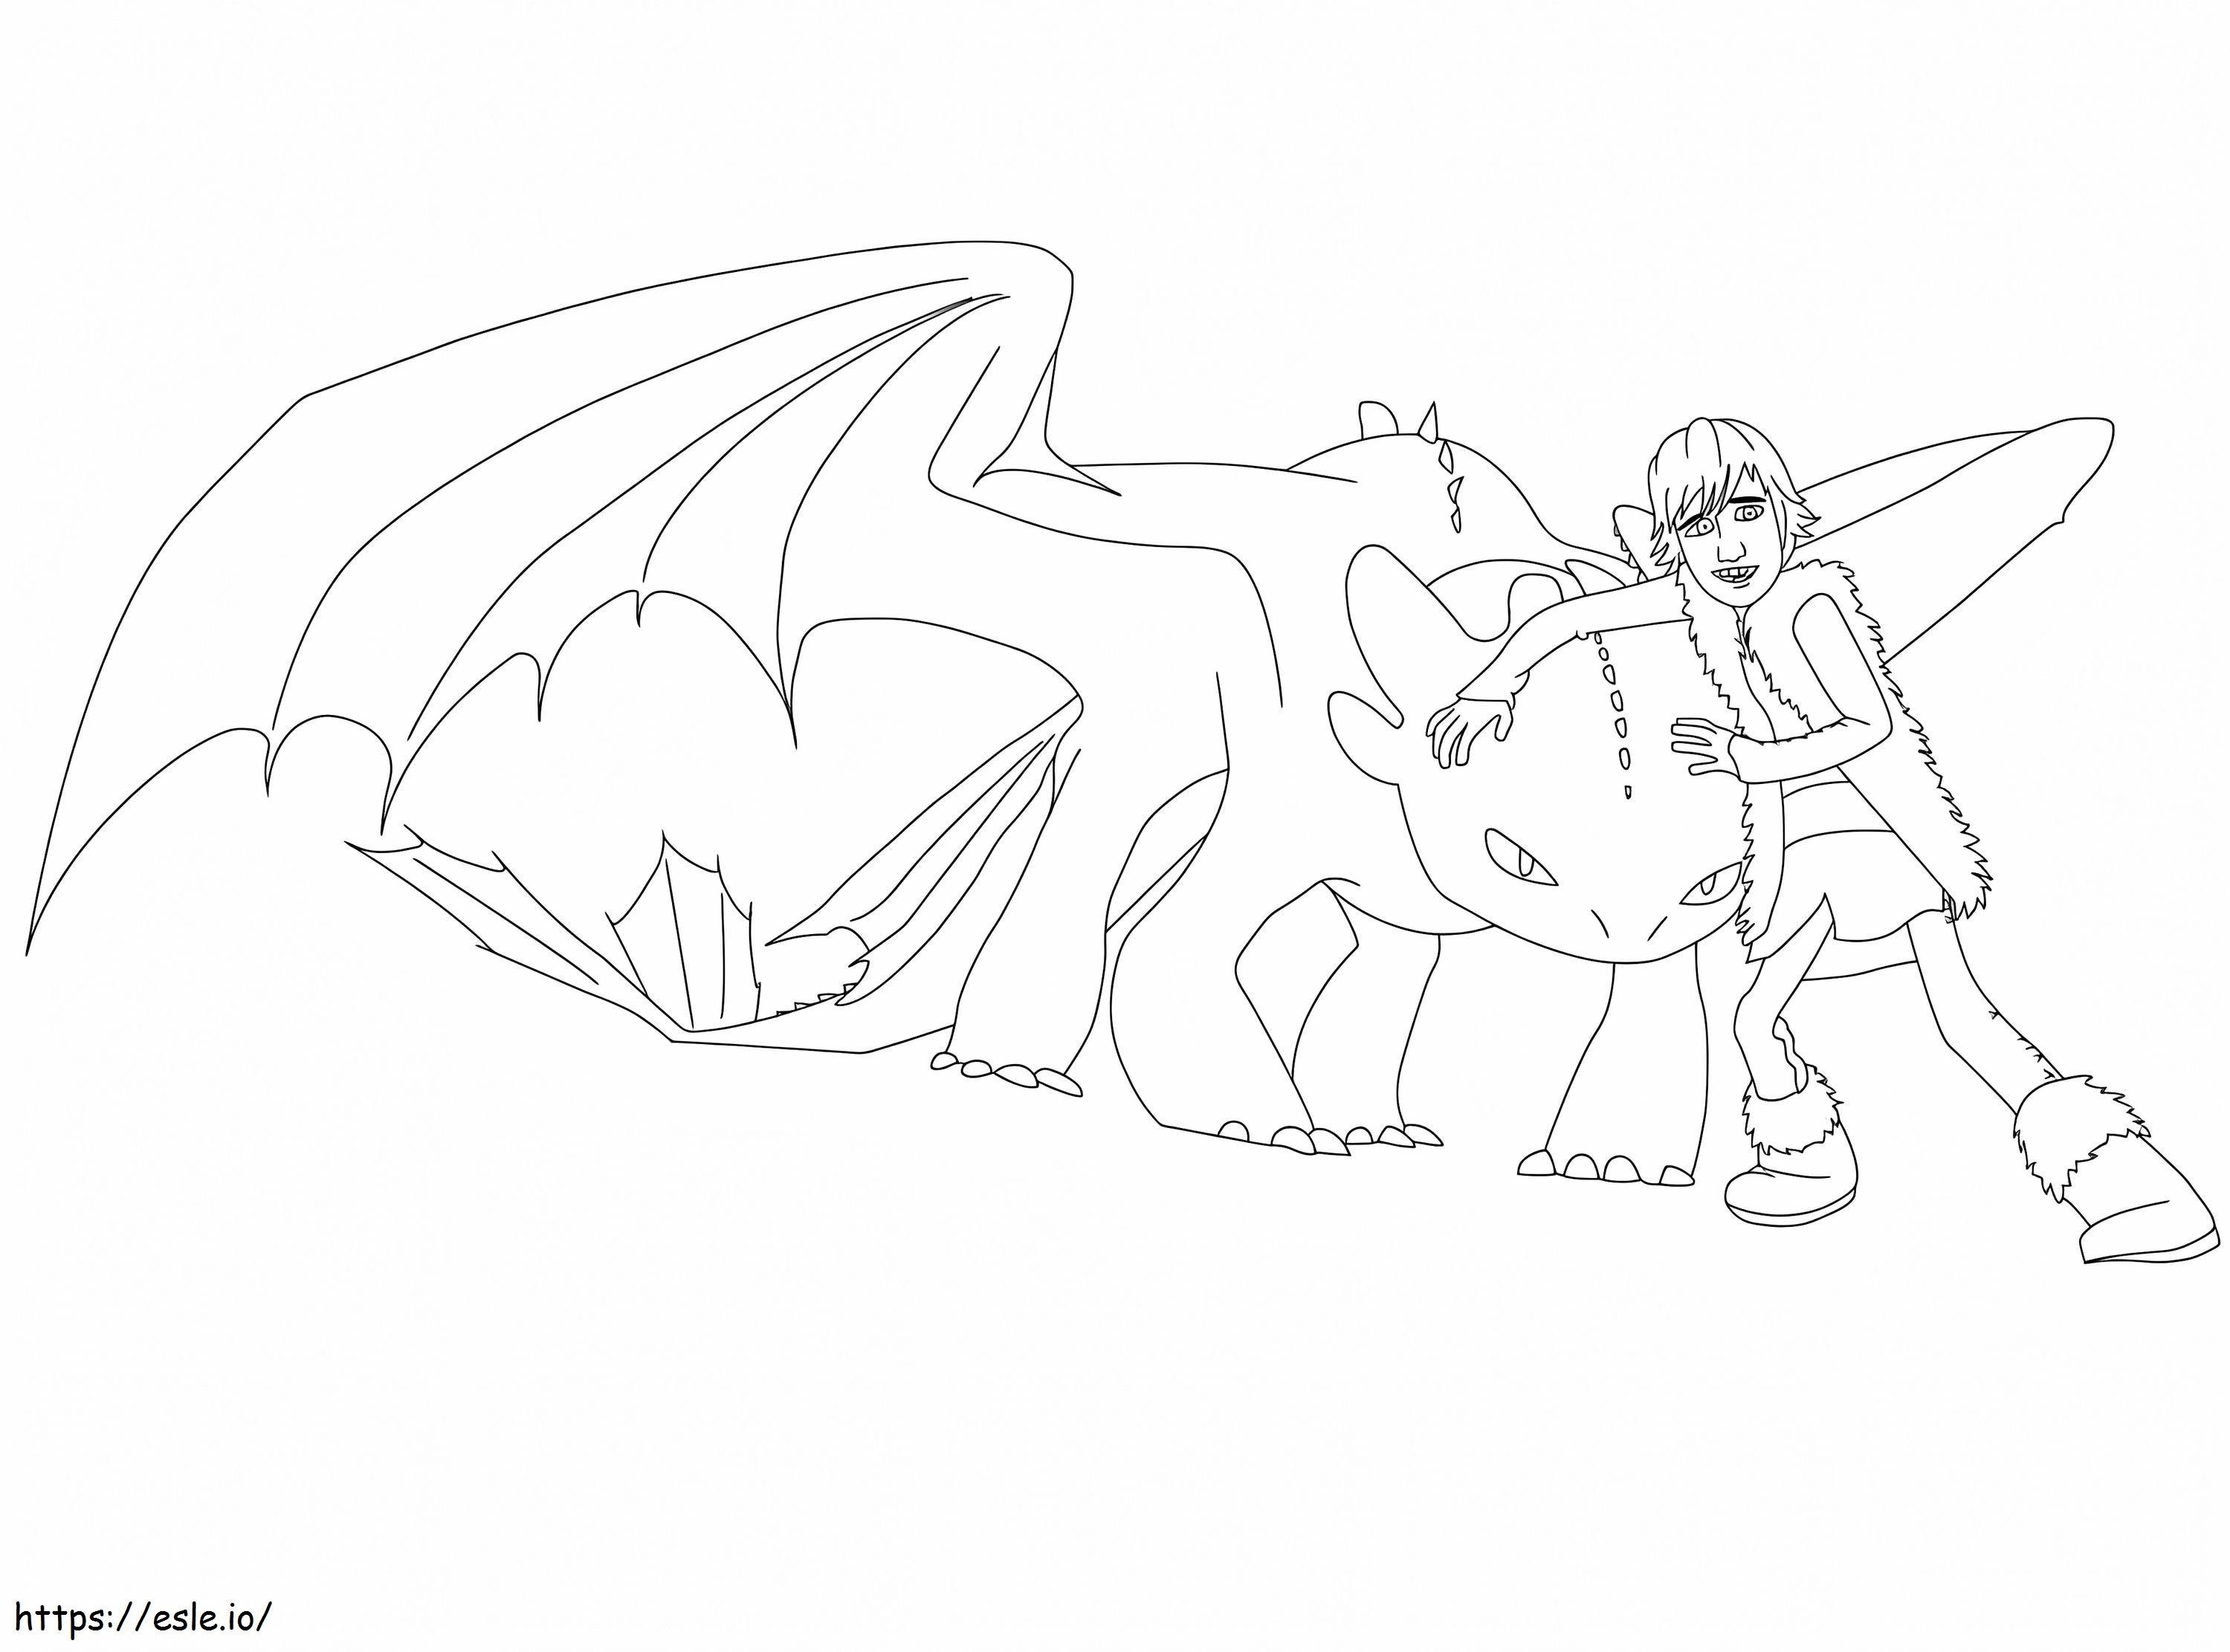 Funny Hiccup And Toothless coloring page